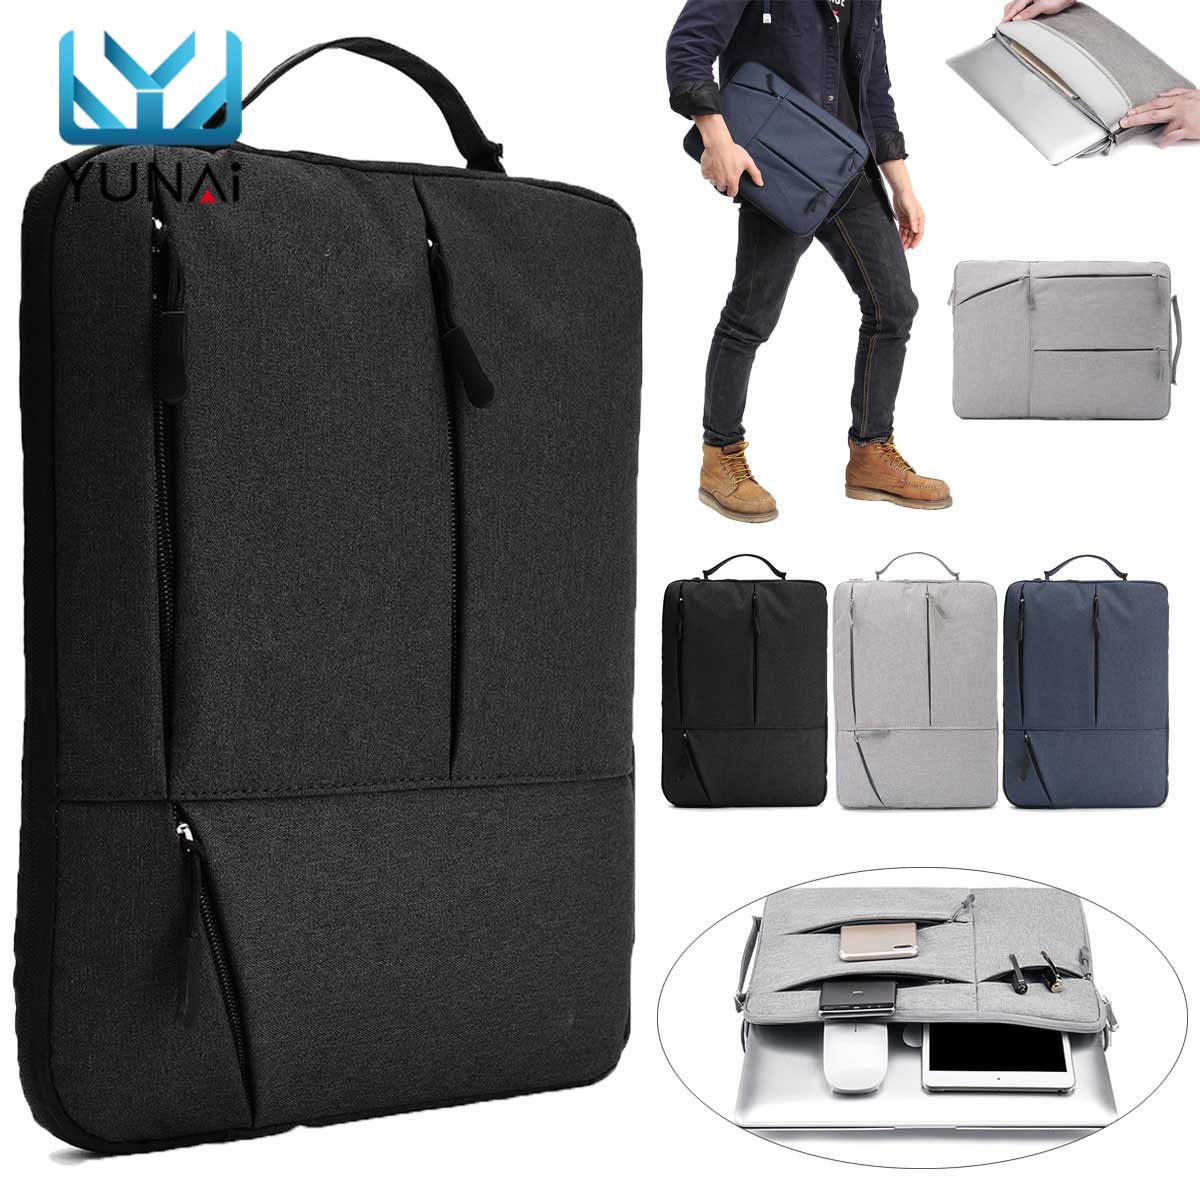 Classic-Business-Backpacks-Capacity-Students-Laptop-Bag-Men-Women-Bags-For-13-inch-Tablet-Laptop-1633412